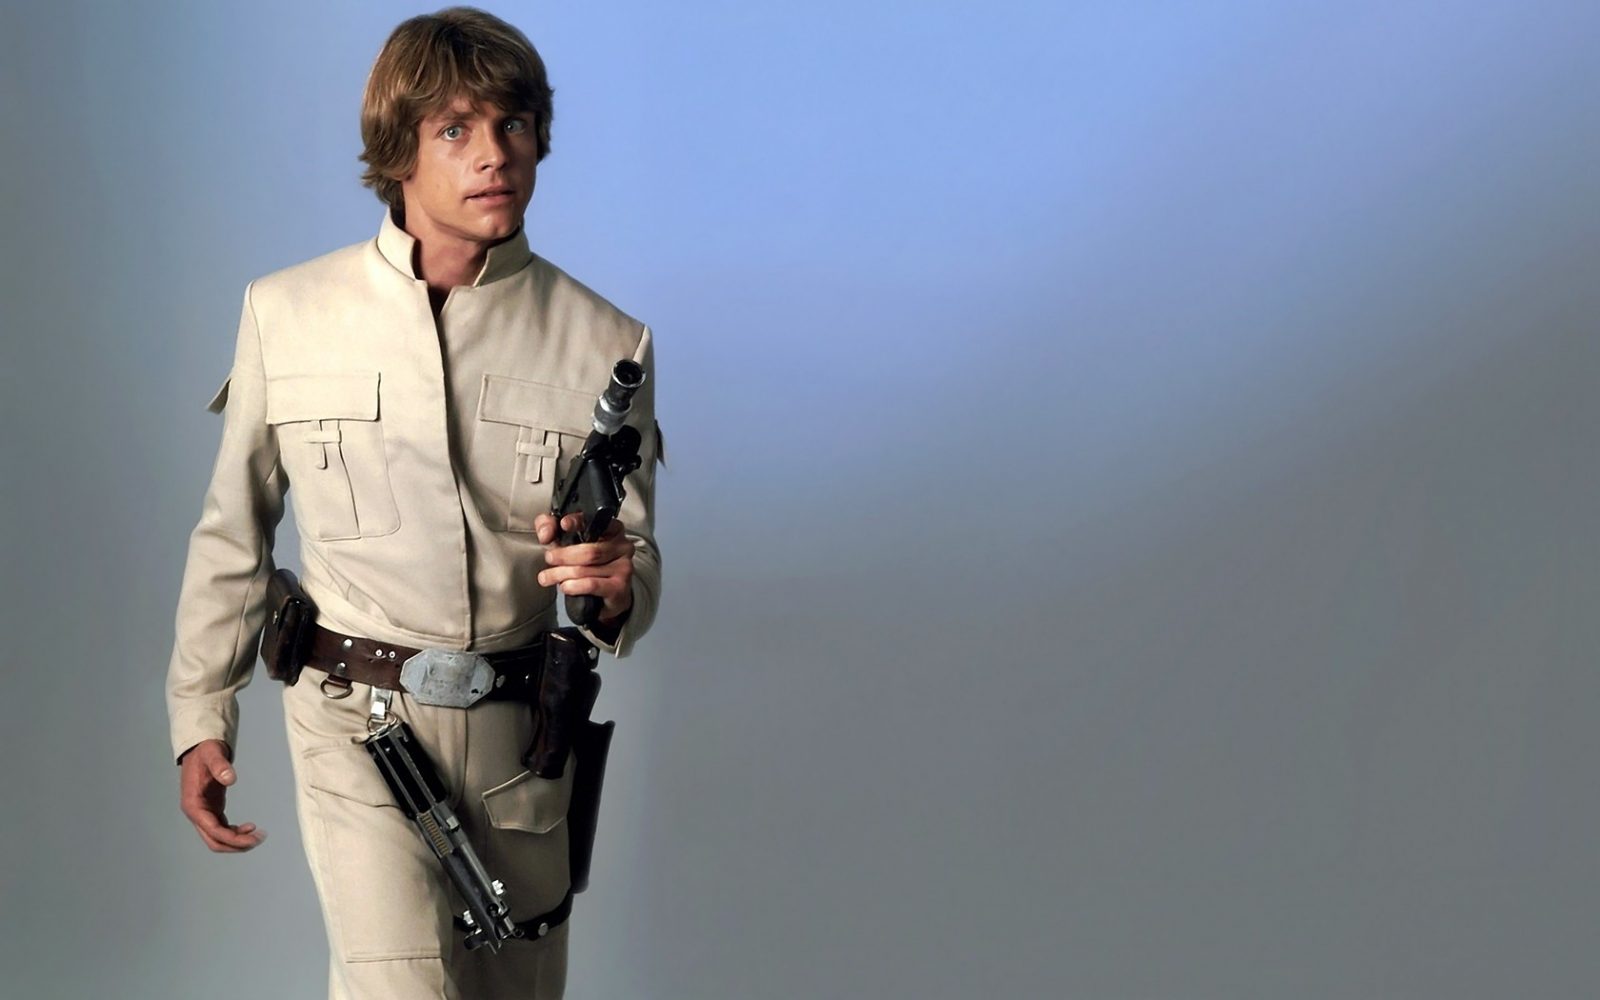 You got: Luke Skywalker. Everyone Has A ”Star Wars” Character That Matches Their Personality — Here‘s Yours Which Star Wars Character Are You?